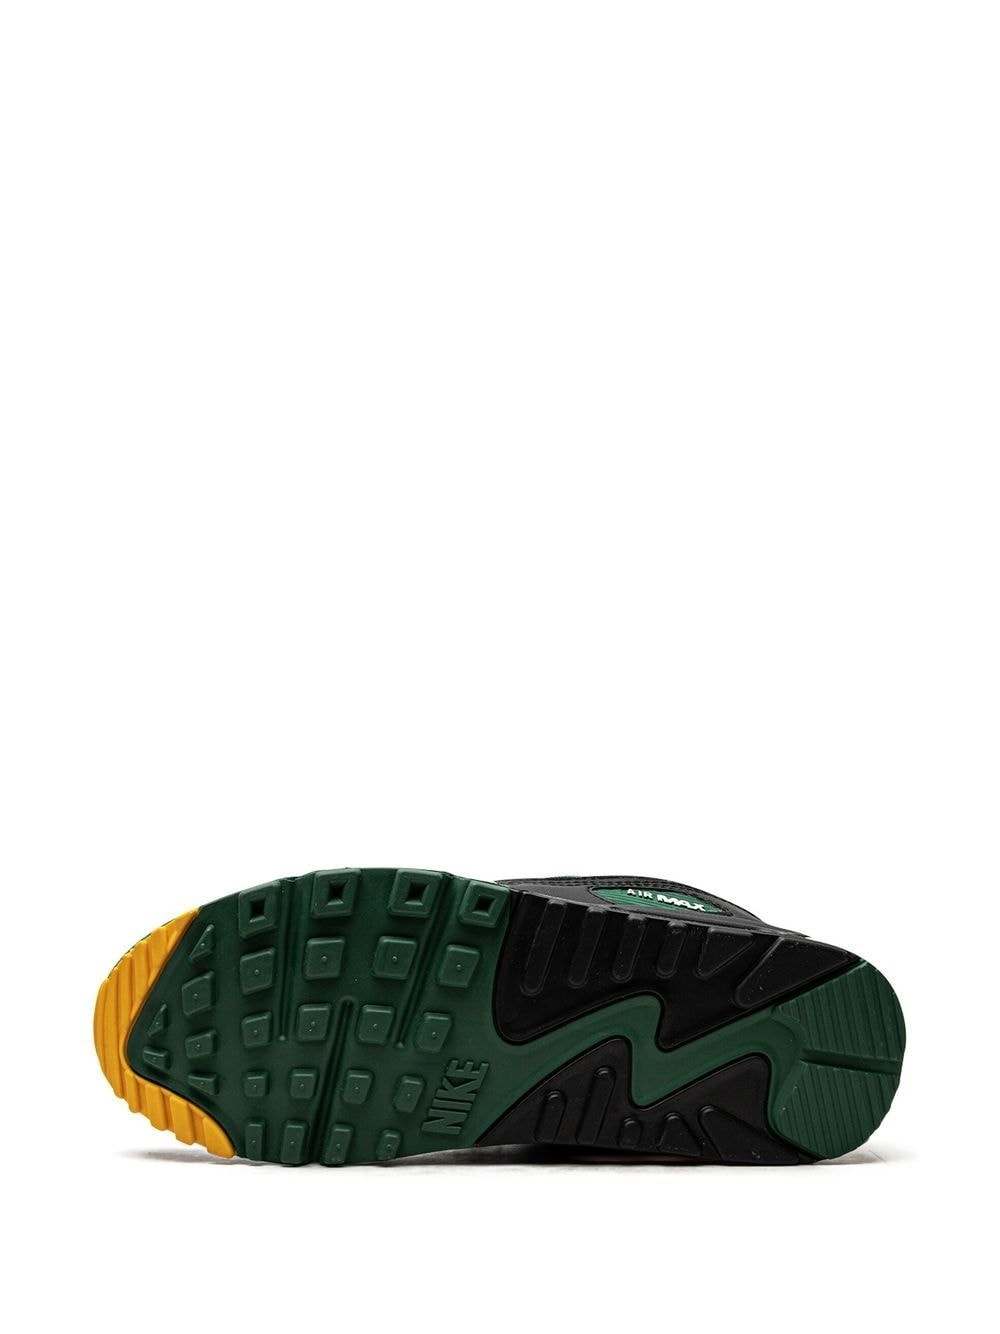 Air Max 90 ''Gorge Green'' sneakers - 4